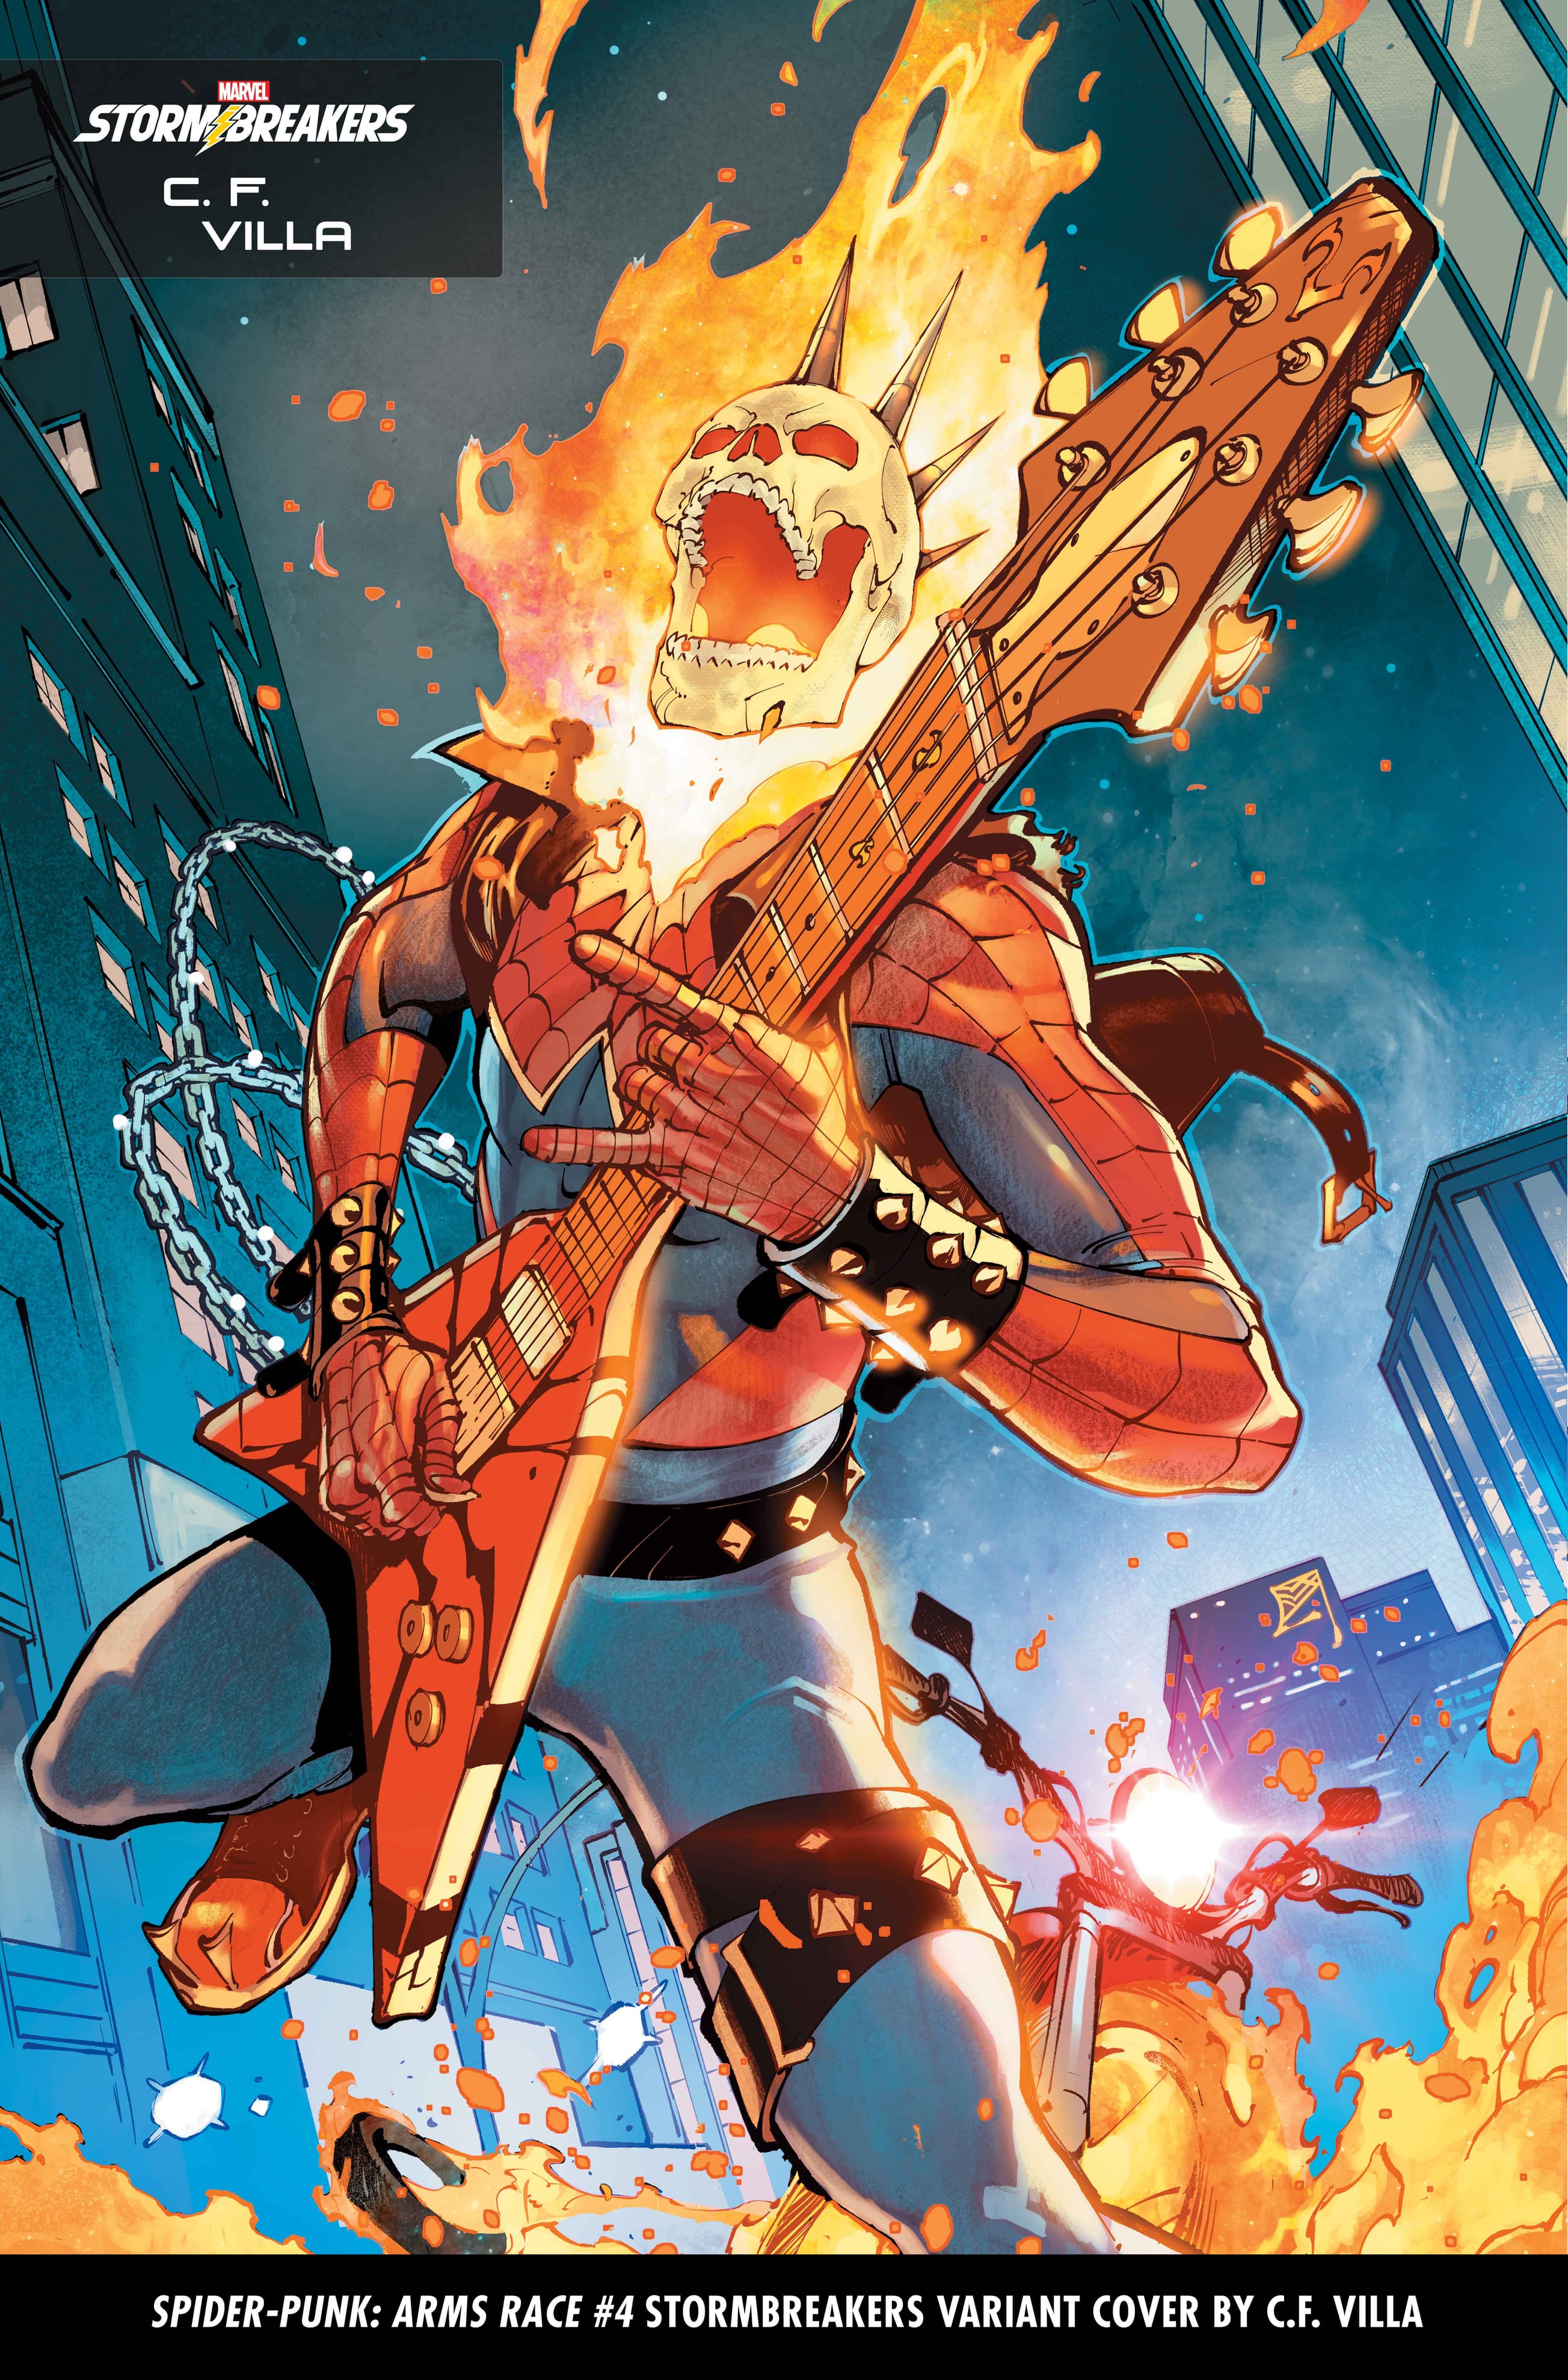 SPIDER-PUNK: ARMS RACE #4 Stormbreakers Variant Cover by C.F. Villa